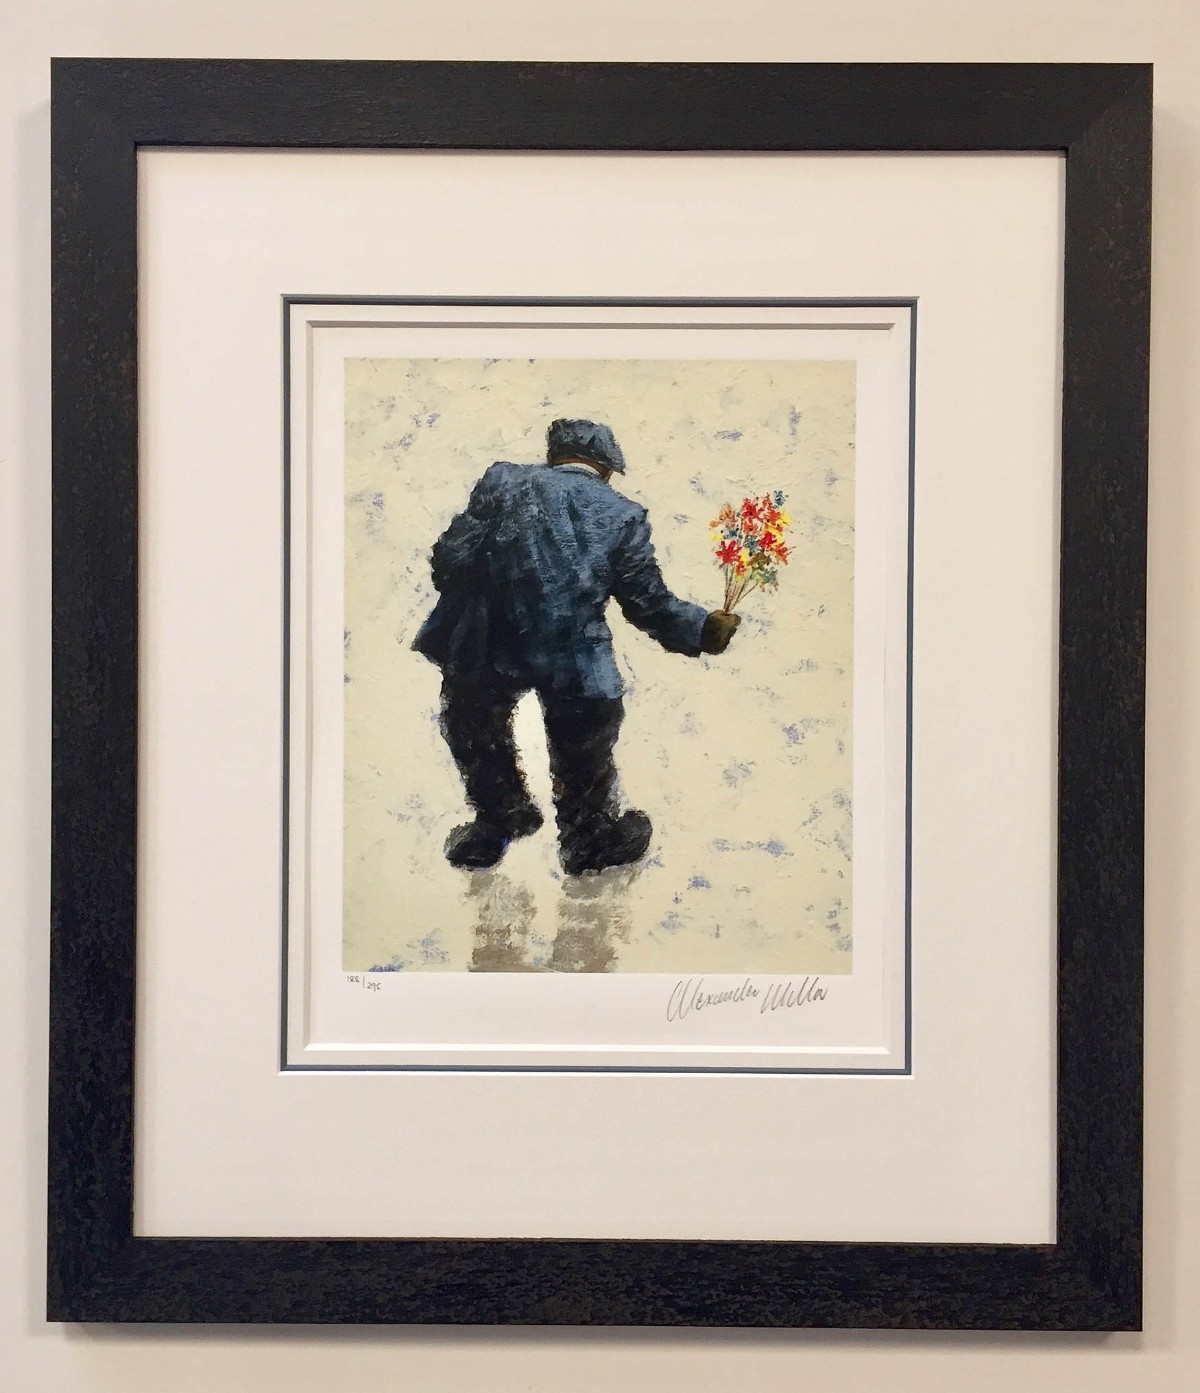 Say it with Flowers (2005) by Alexander Millar